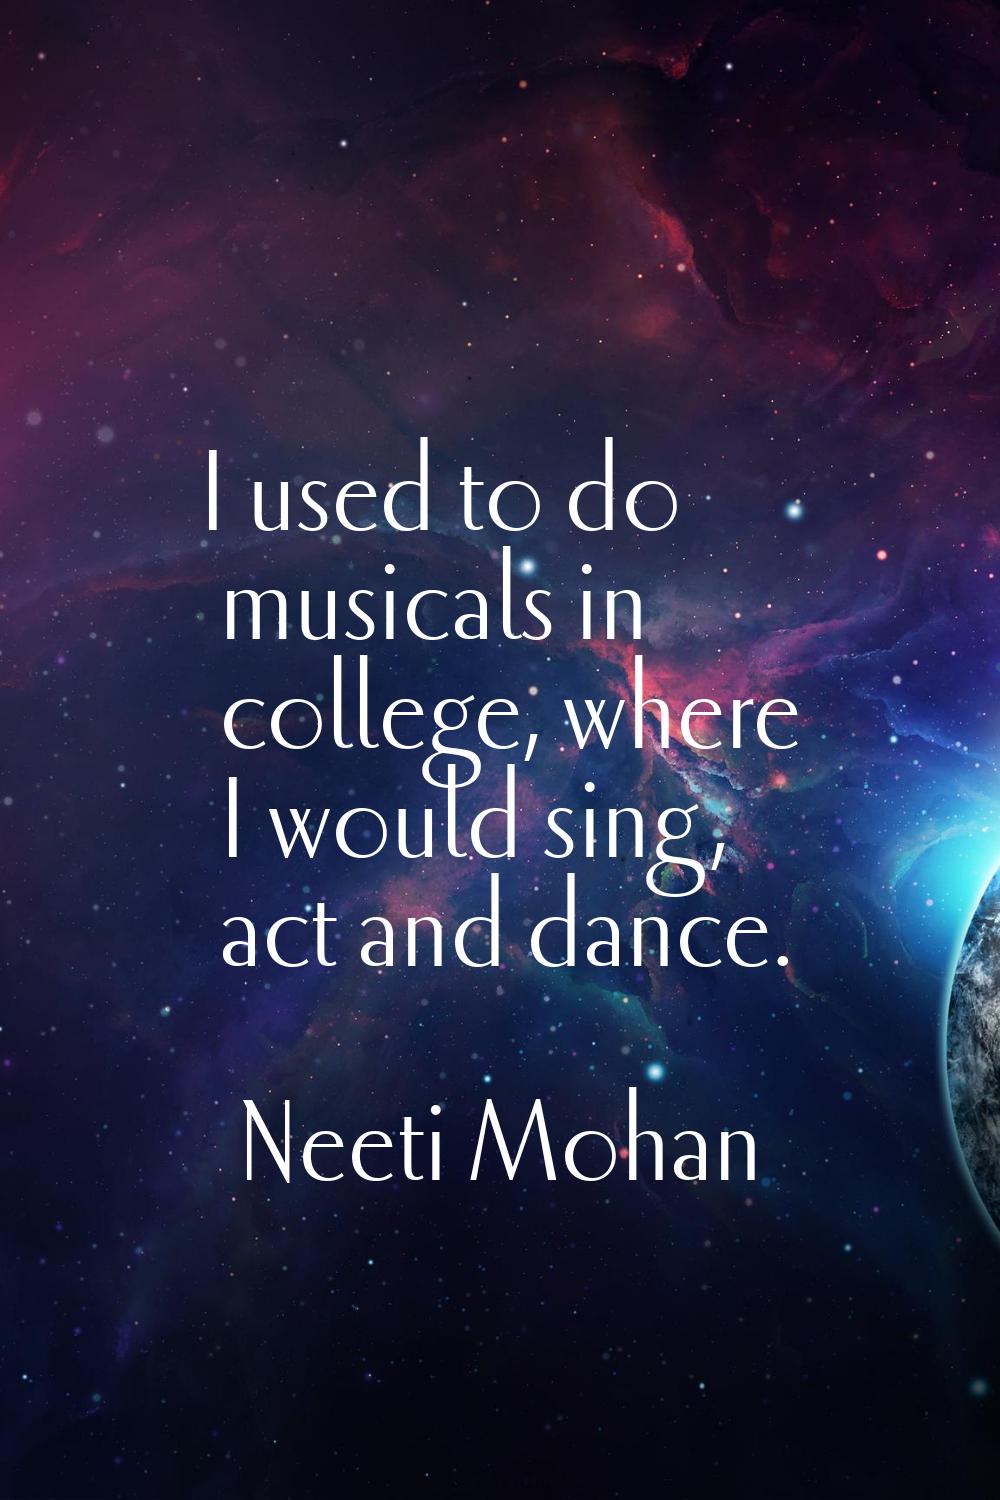 I used to do musicals in college, where I would sing, act and dance.